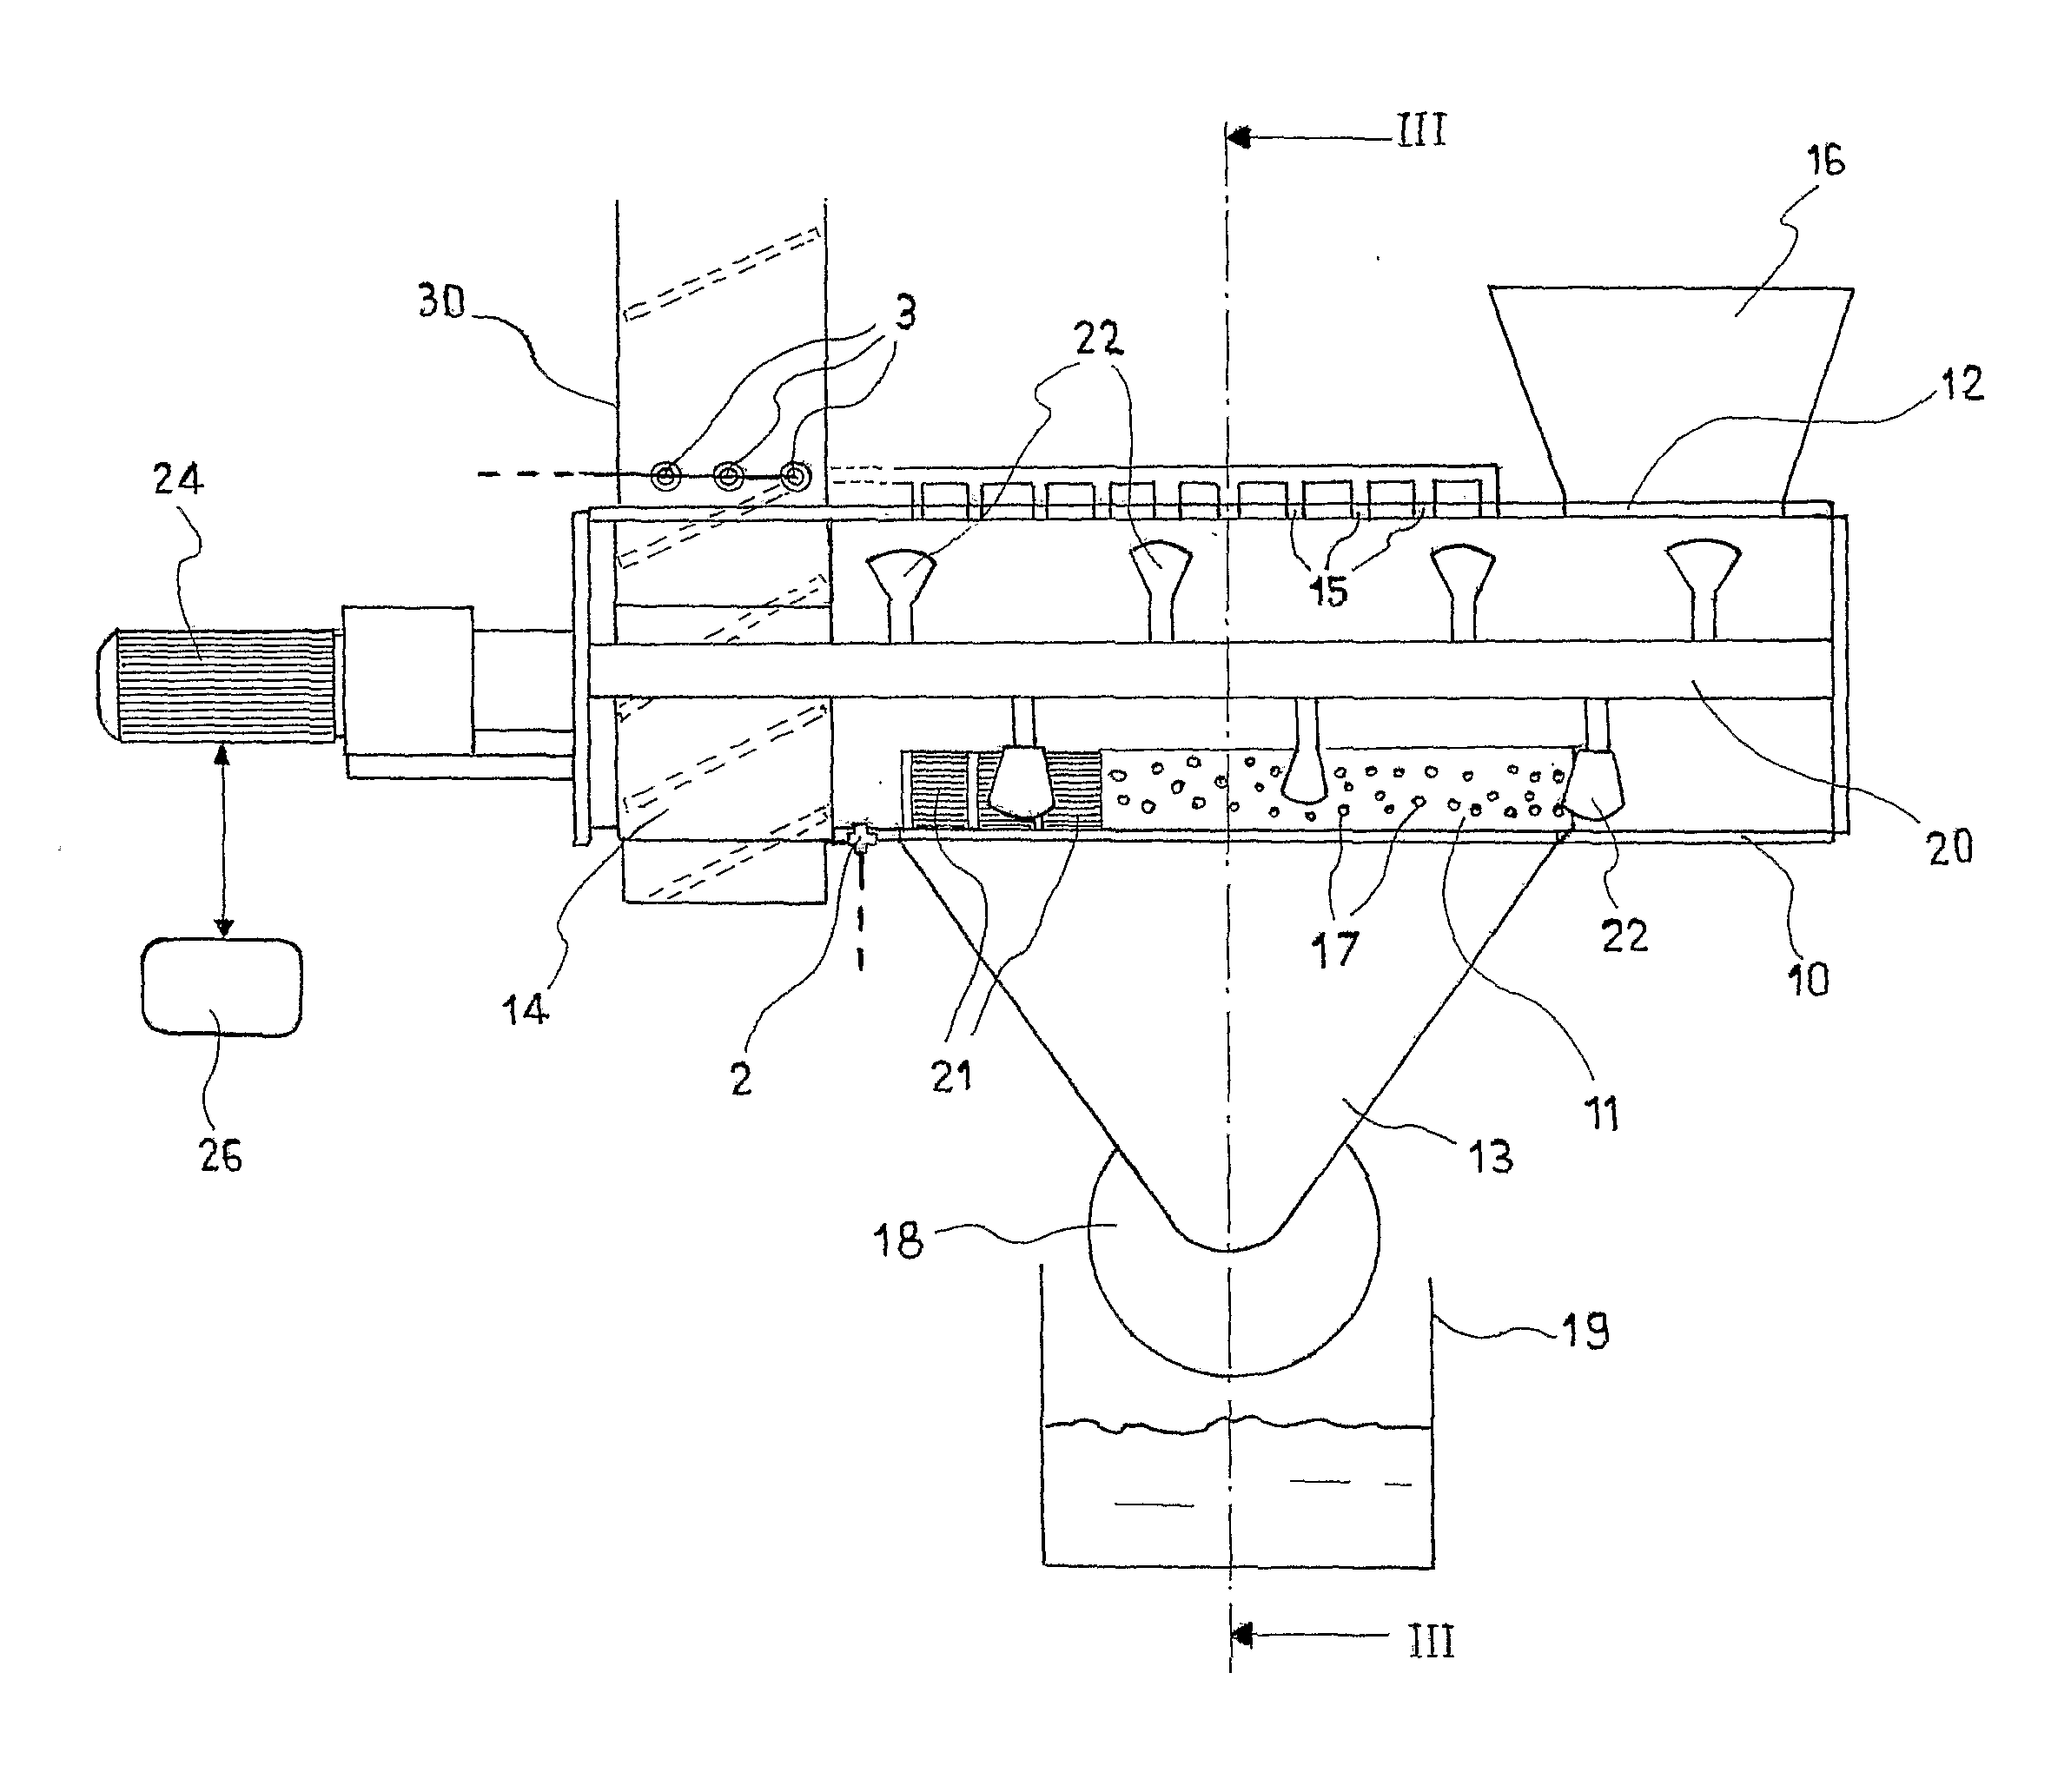 Machine and method for continuously washing containers made of plastic material, and removal of contaminants and labels from their surface